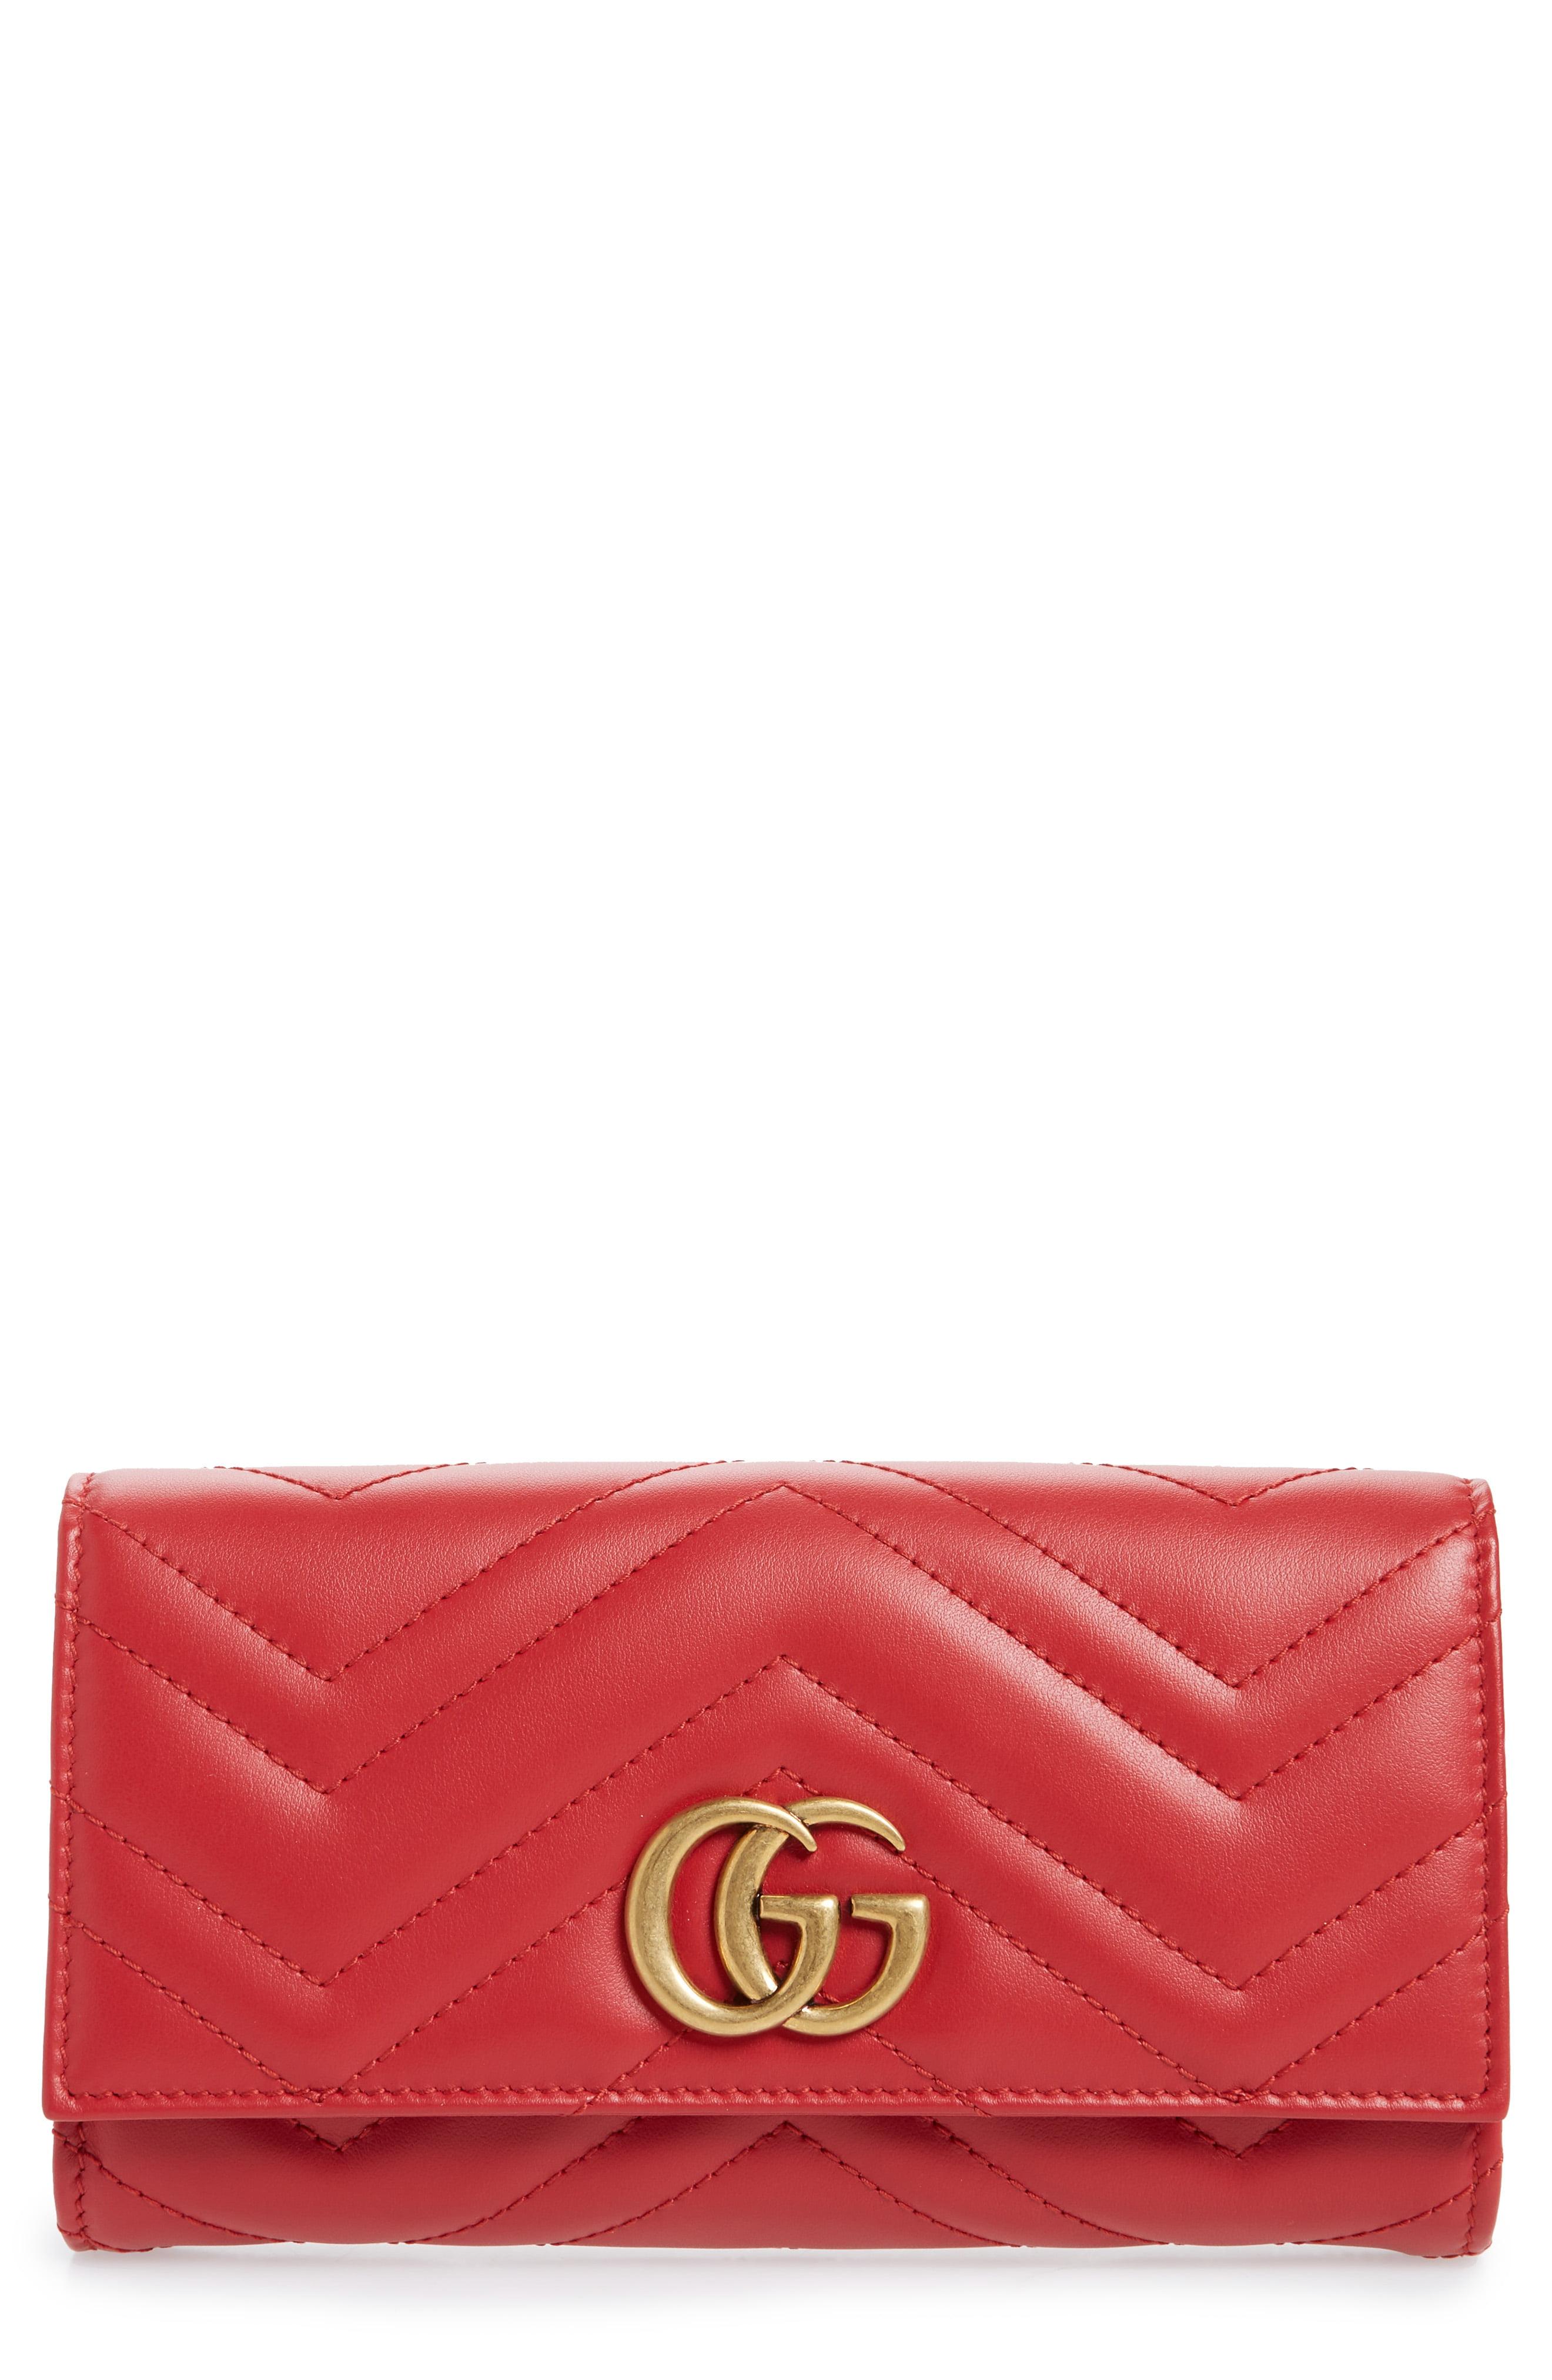 Lyst - Gucci Marmont 2.0 Leather Continental Wallet